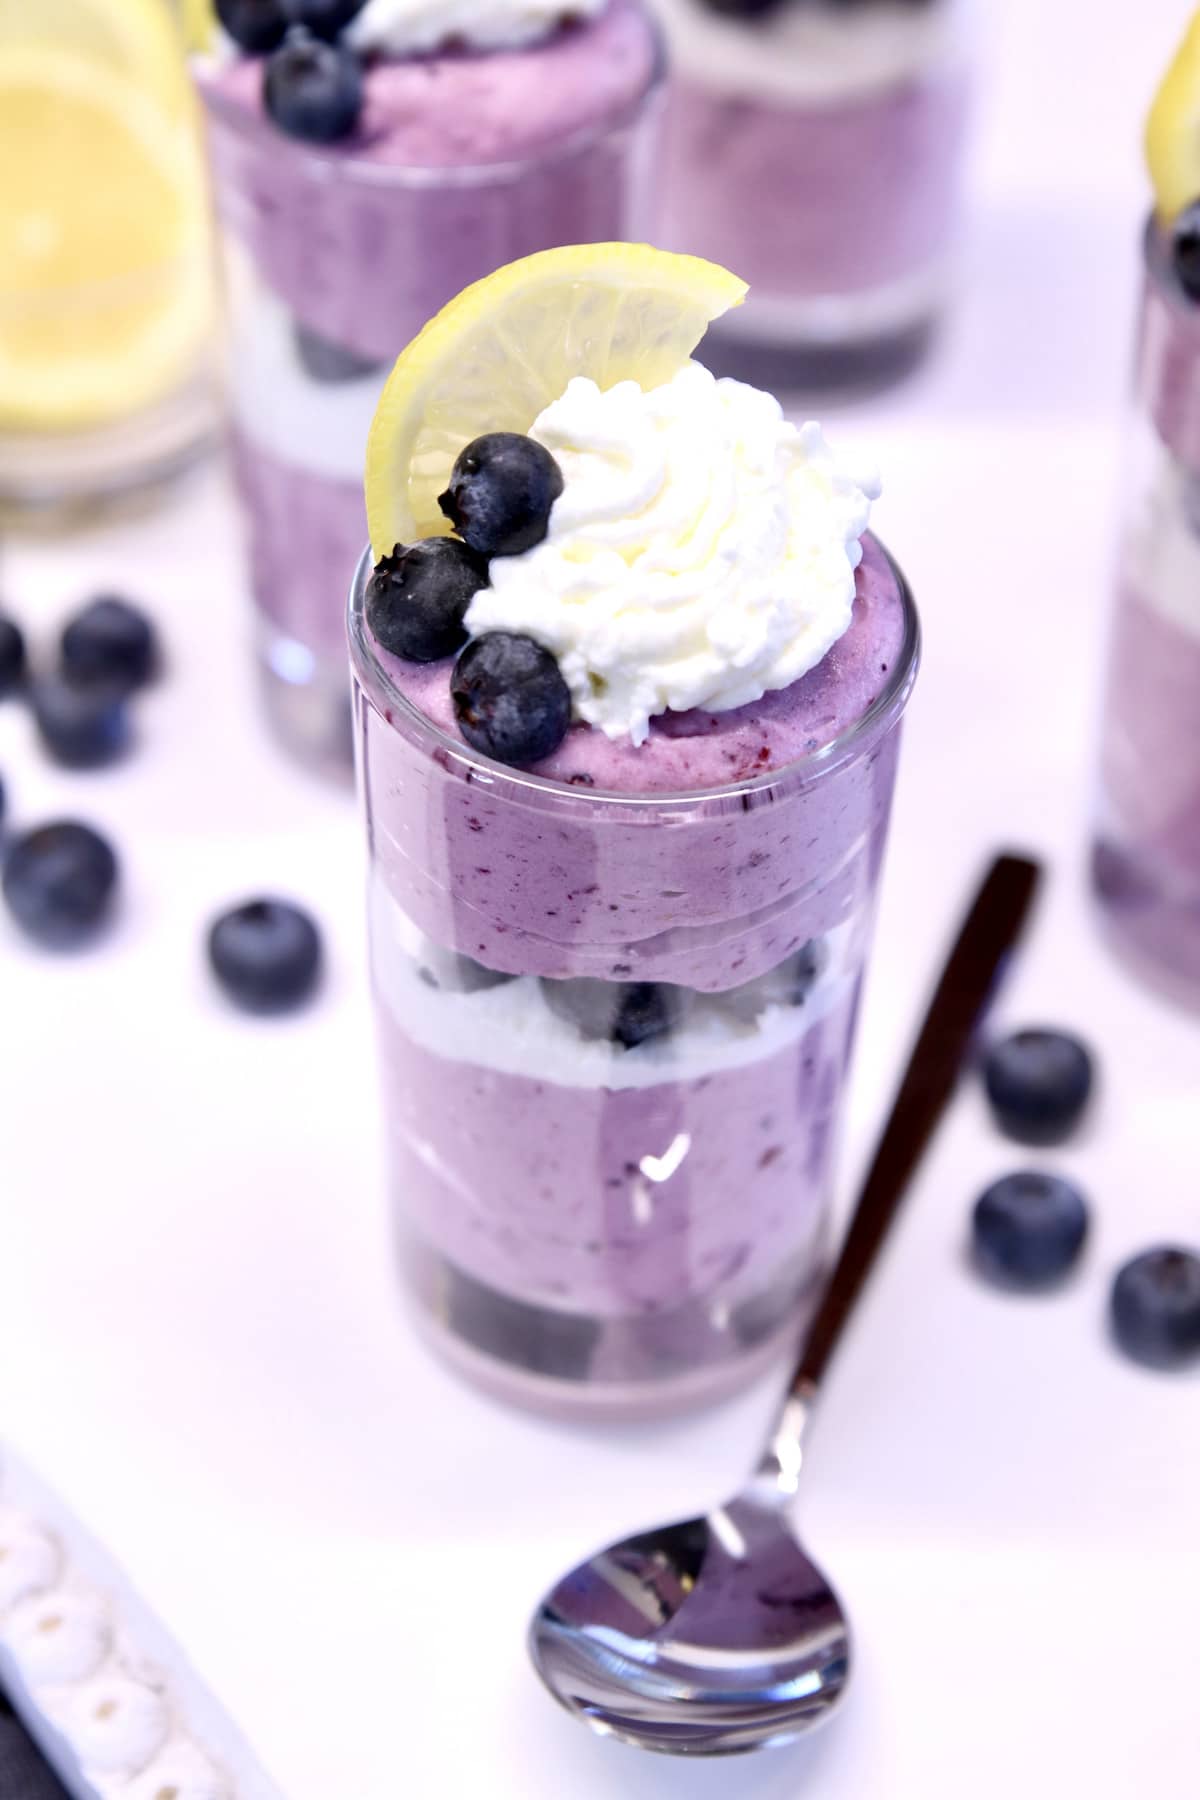 blueberry cheesecake in a glass with whipped cream.